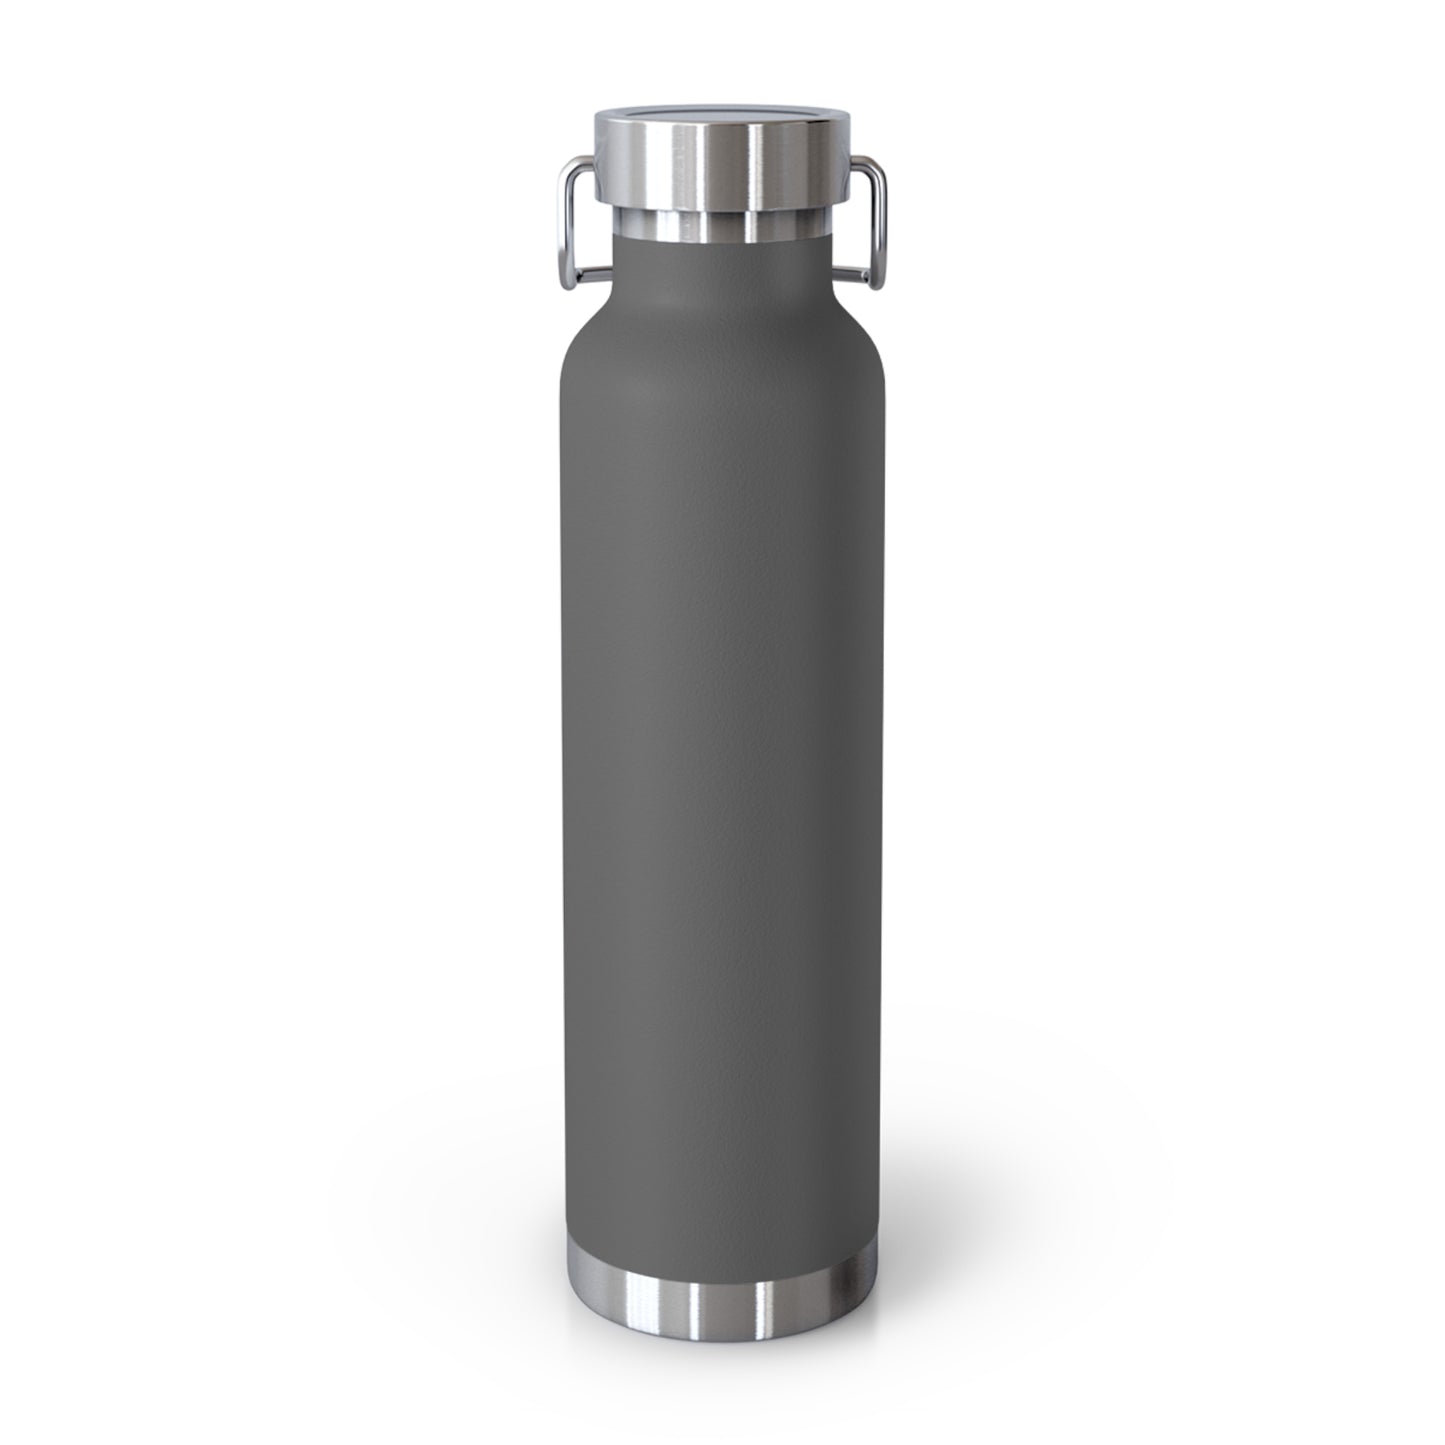 I stand with Israel - Copper Vacuum Insulated Bottle, 22oz